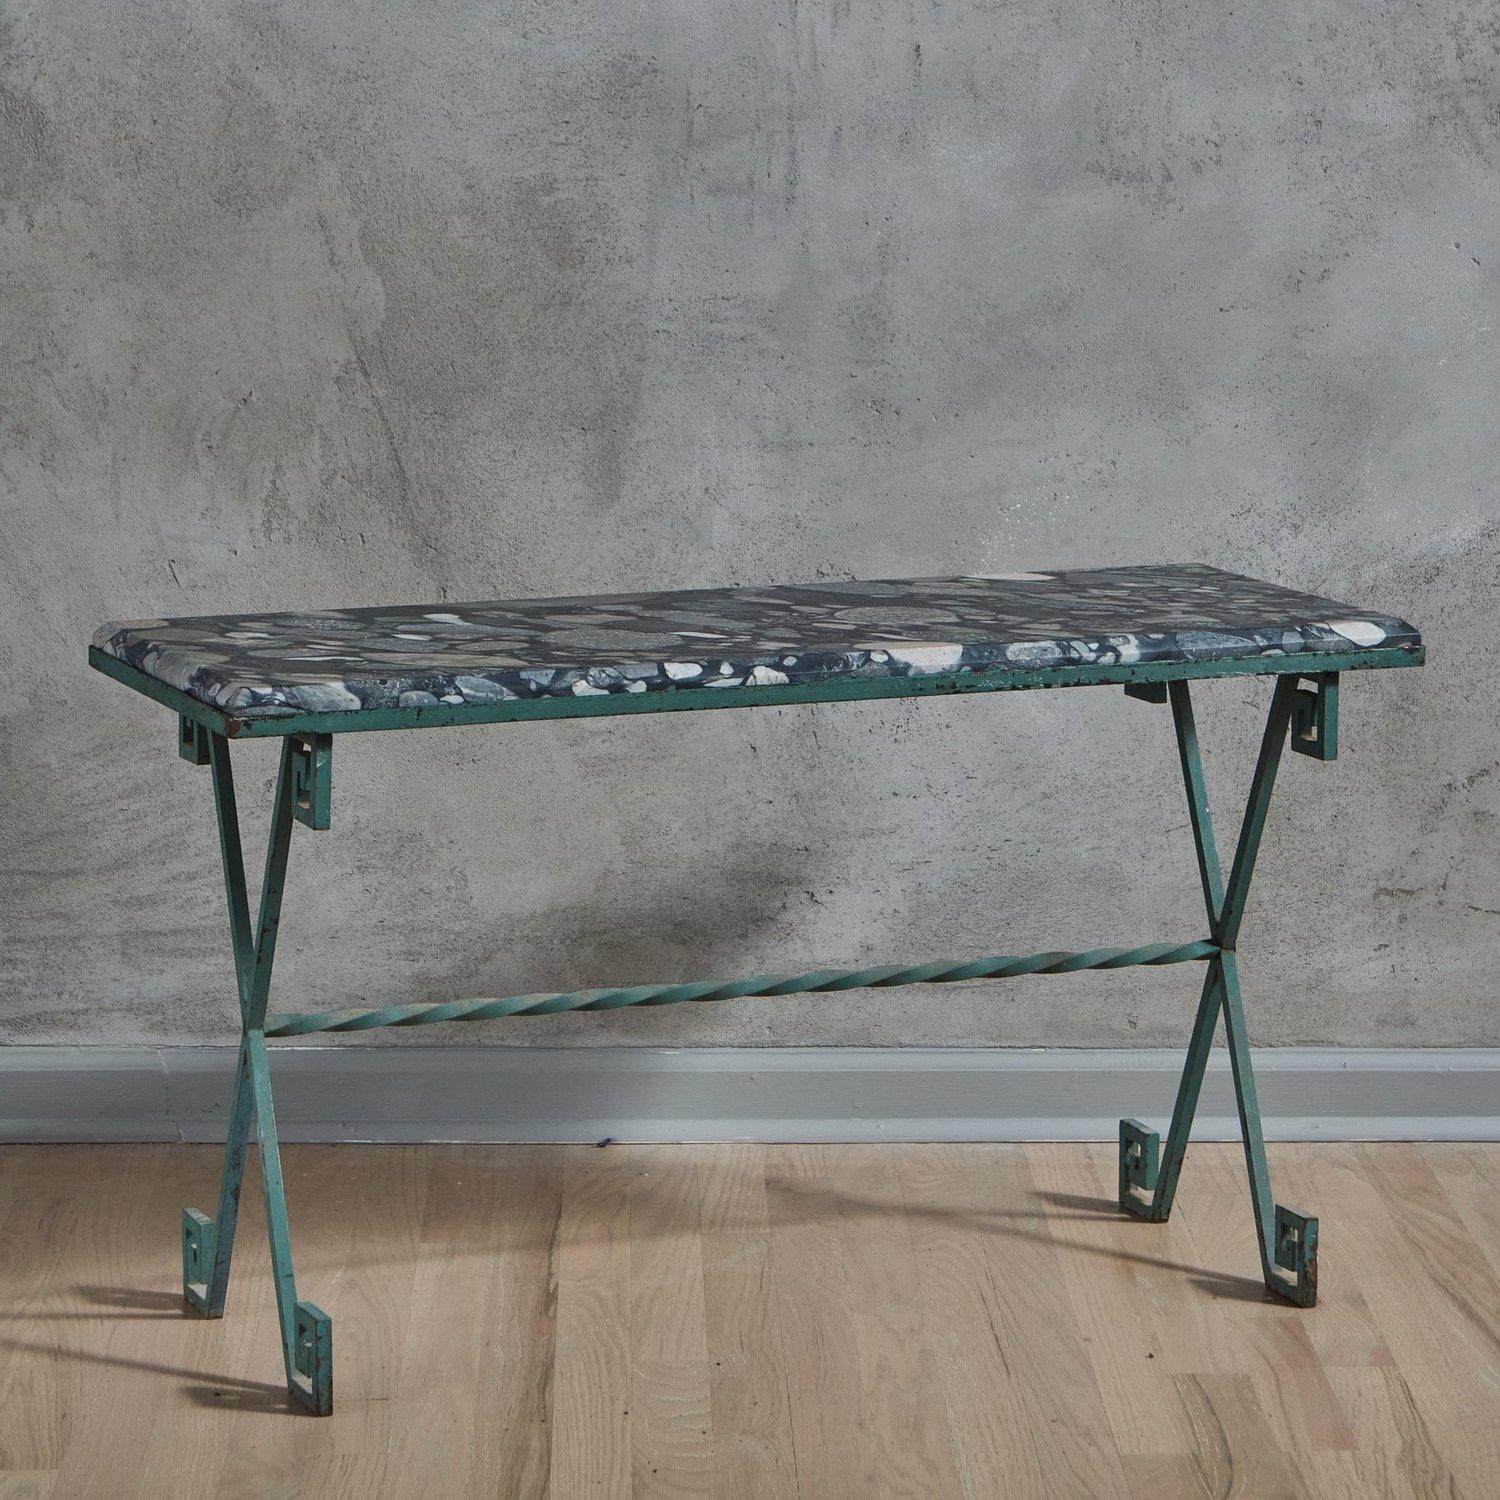 A 1960s French coffee table featuring a green metal base with greek key motifs and a center stretcher. This table has a gorgeous rectangular Marinace Verde granite top with a bevel edge featuring a range of green and blue hues. Unmarked. Sourced in